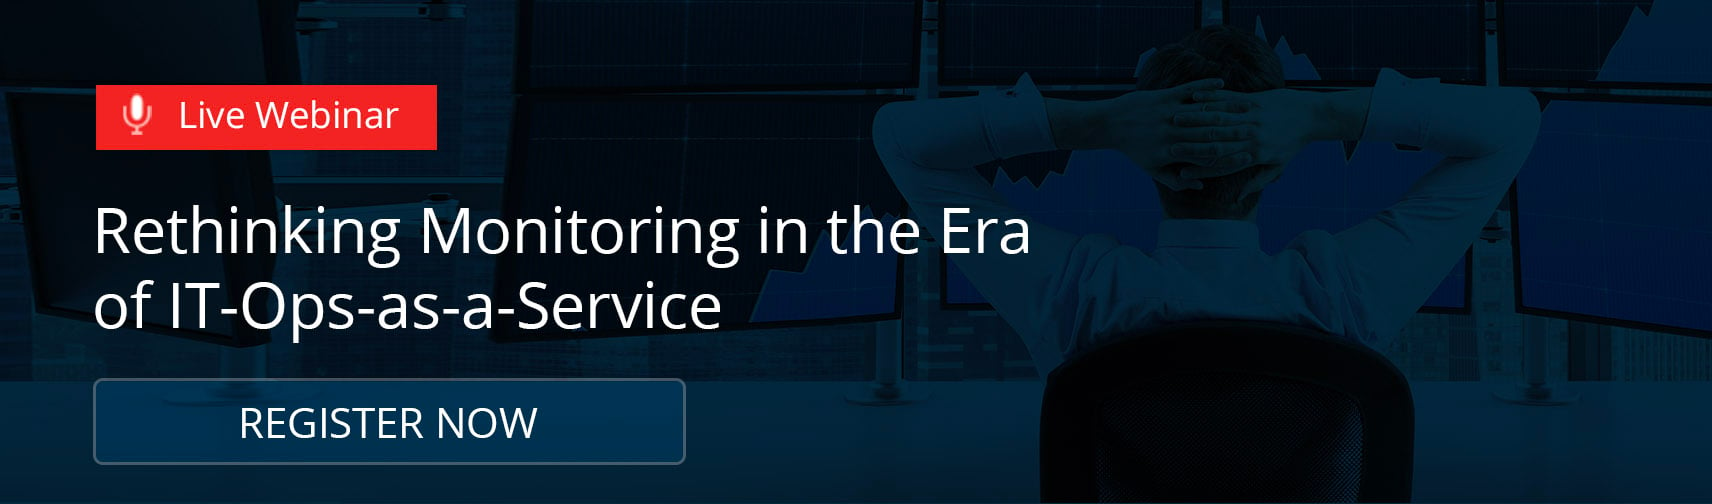 Webinar: Rethinking Monitoring In The Era of IT-Ops-as-a-Service